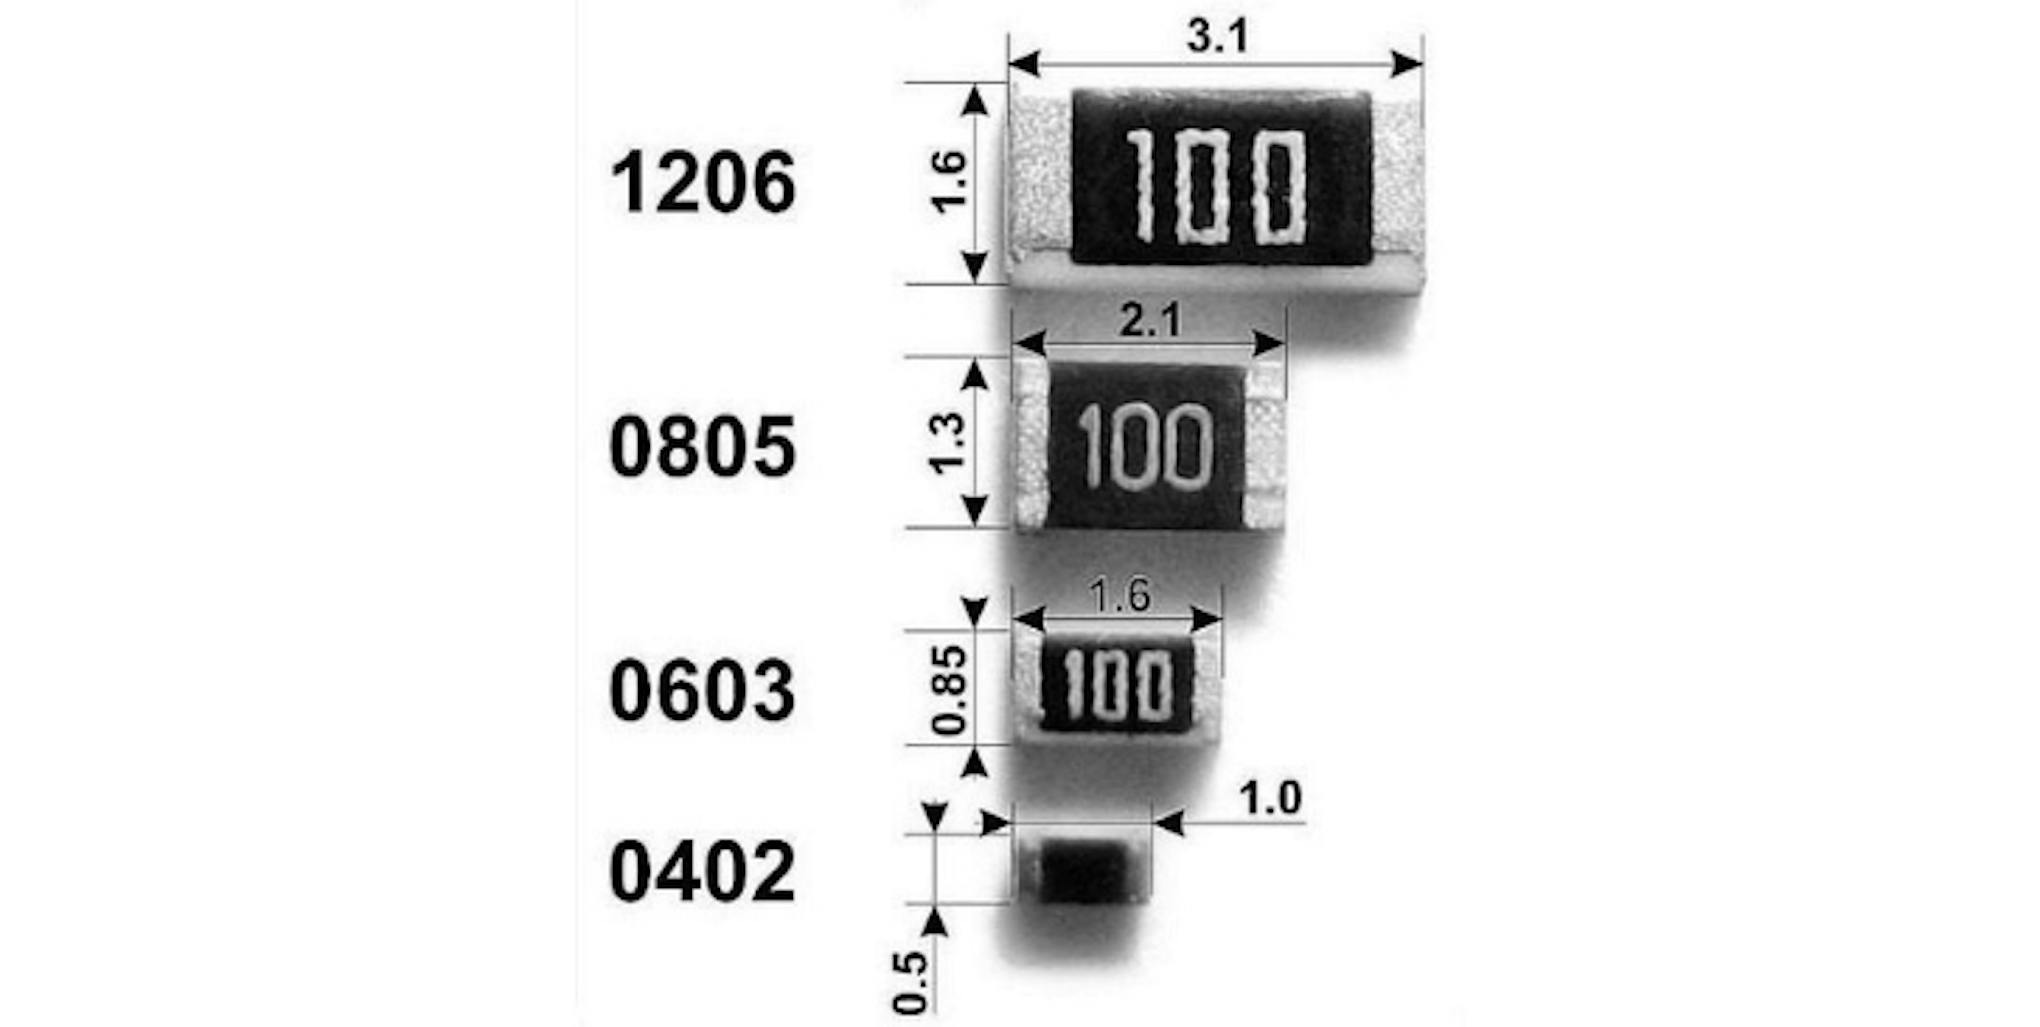 The Standard Sizes for Resistors in mm.